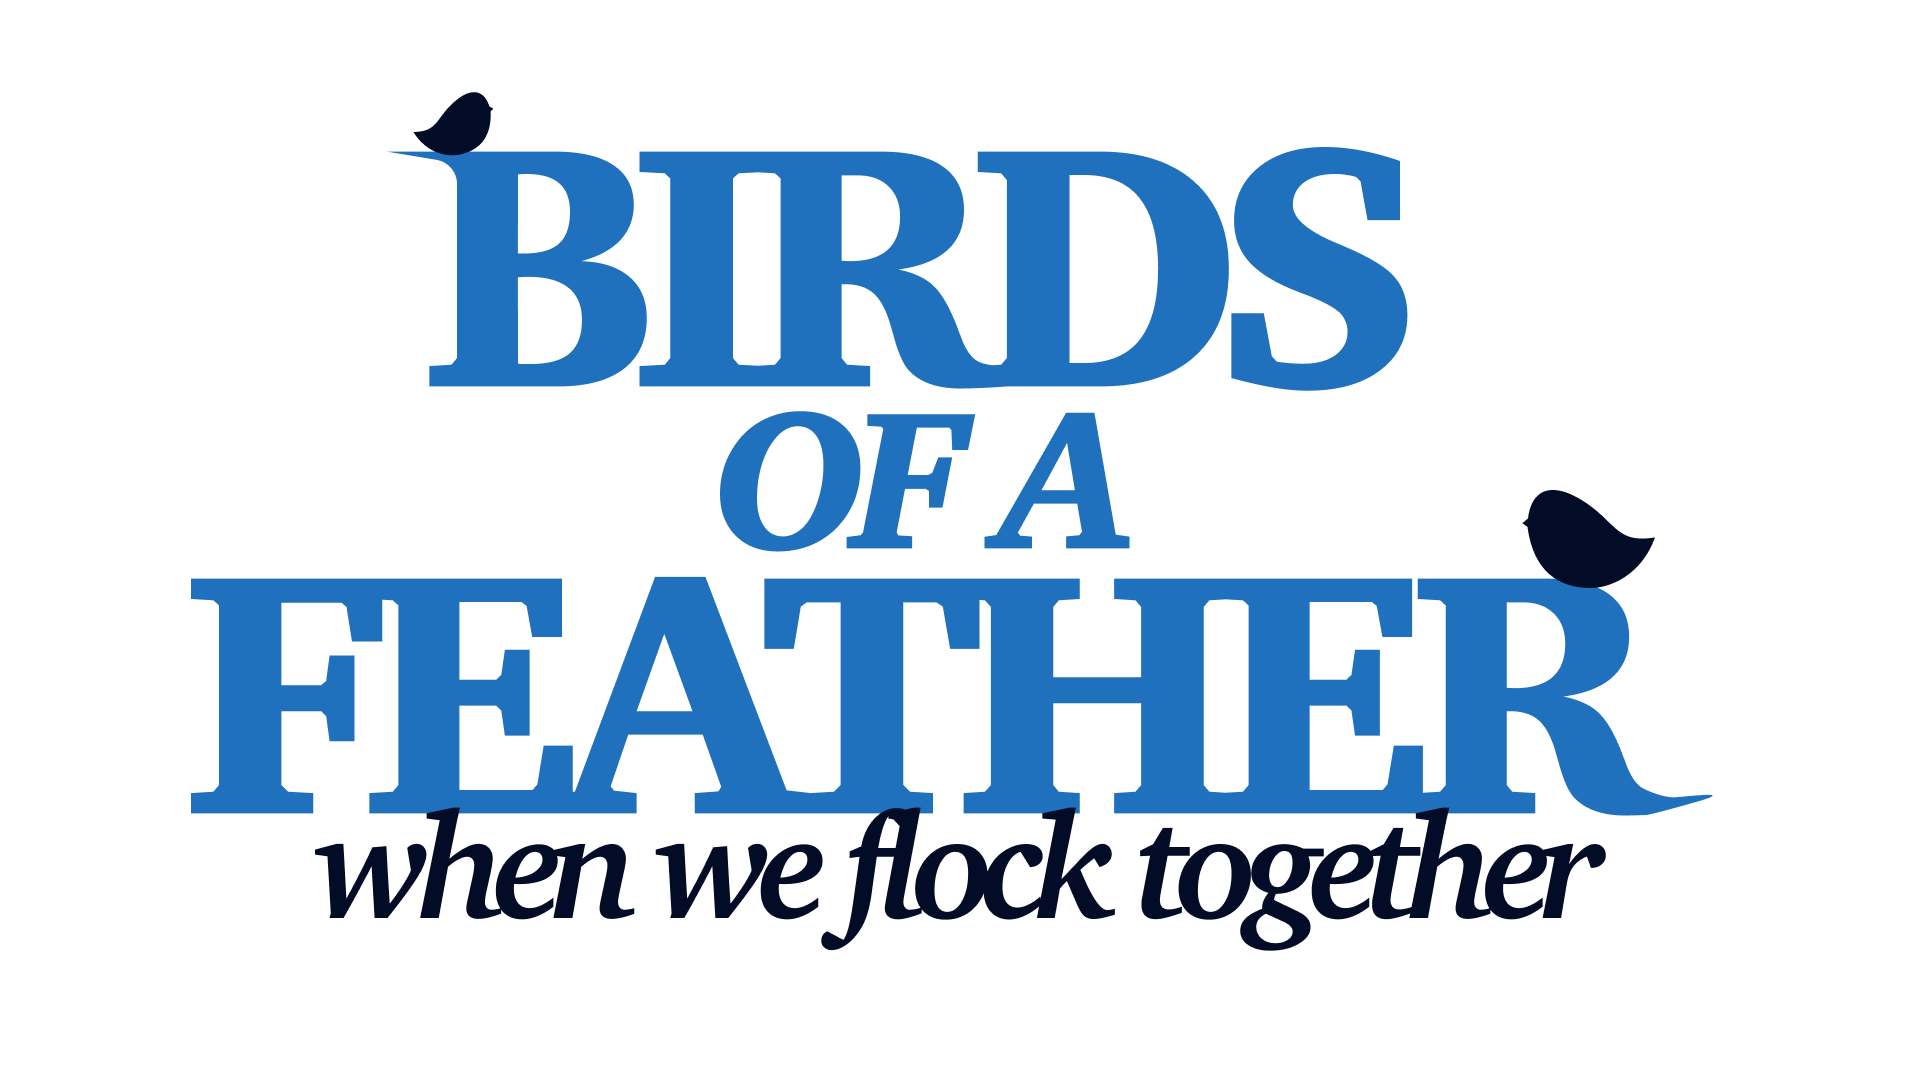 Birds of a Feather: When We Flock Together logo